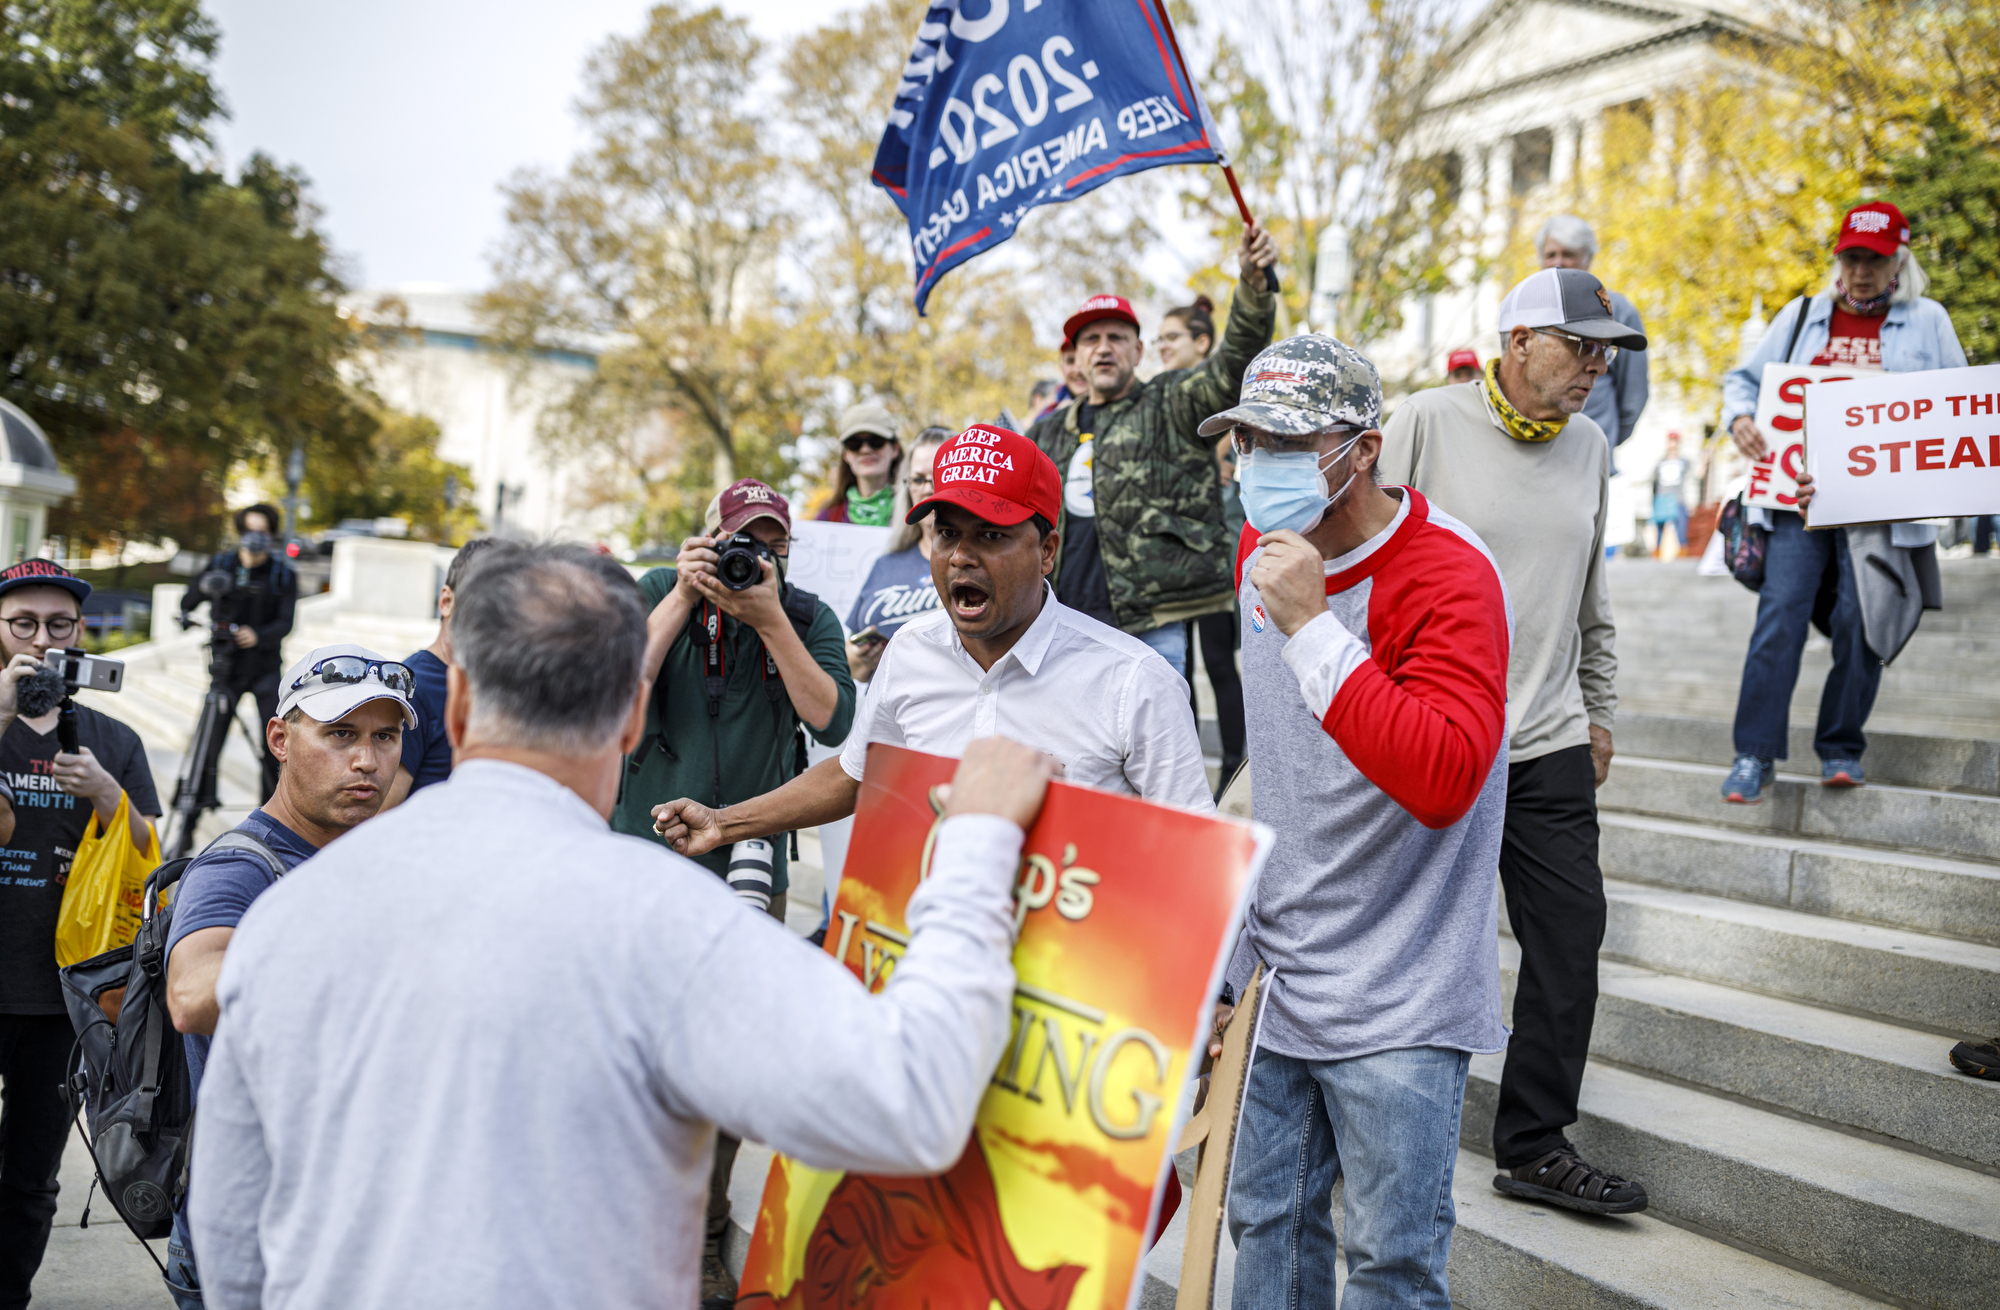 An argument erupts between rally attendees and Brent Stine of Harrisburg. A rally to "Stop the Steal" and to count every legal vote of the election is held at the Pennsylvania state Capitol in Harrisburg, November 5, 2020.
Dan Gleiter | dgleiter@pennlive.com